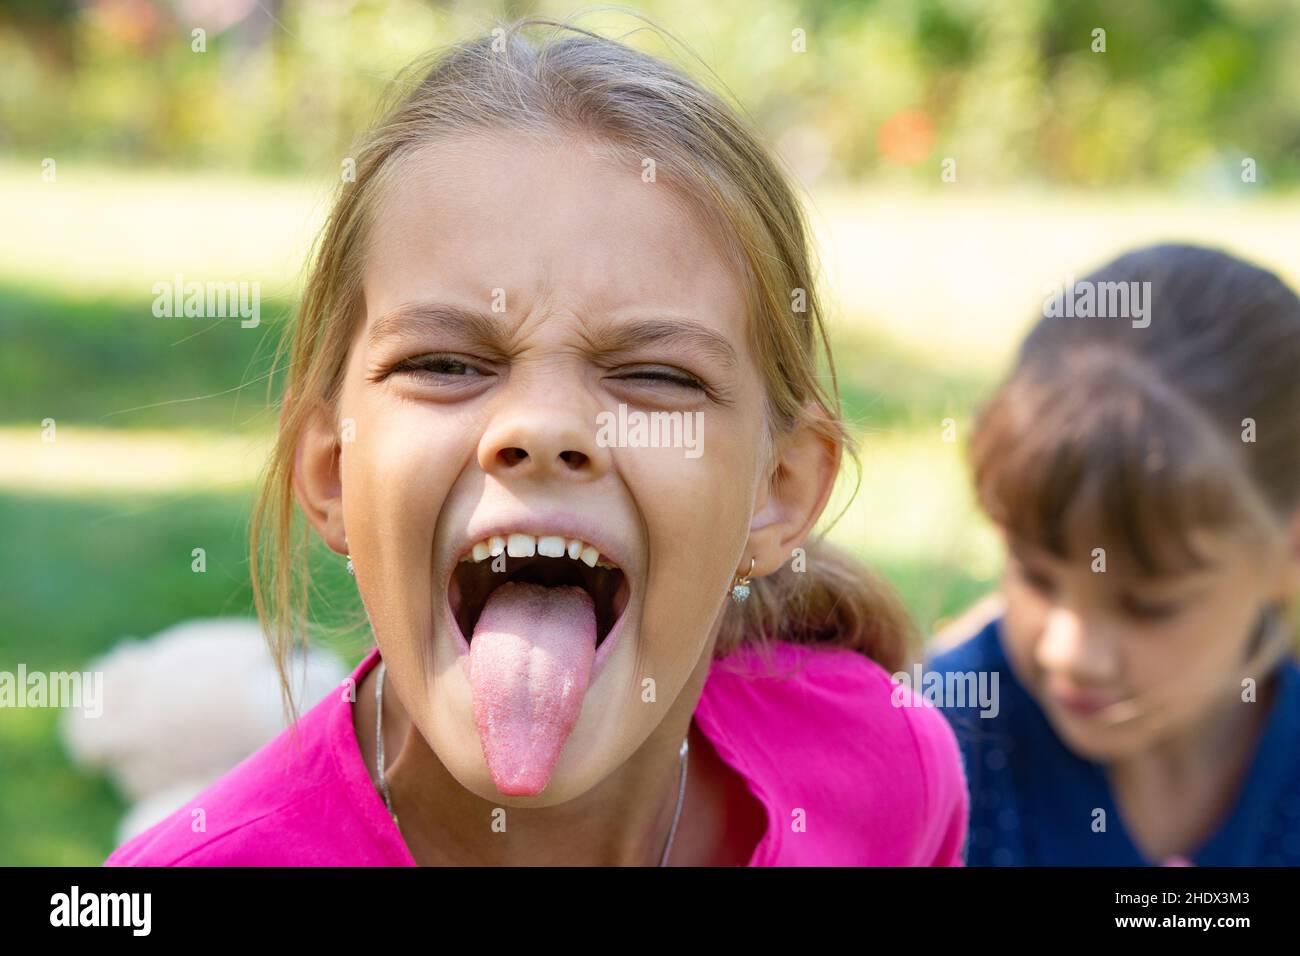 girl, sticking out tongue, grimace, girls, poking tongues, sticking out tongues, grimaces Stock Photo